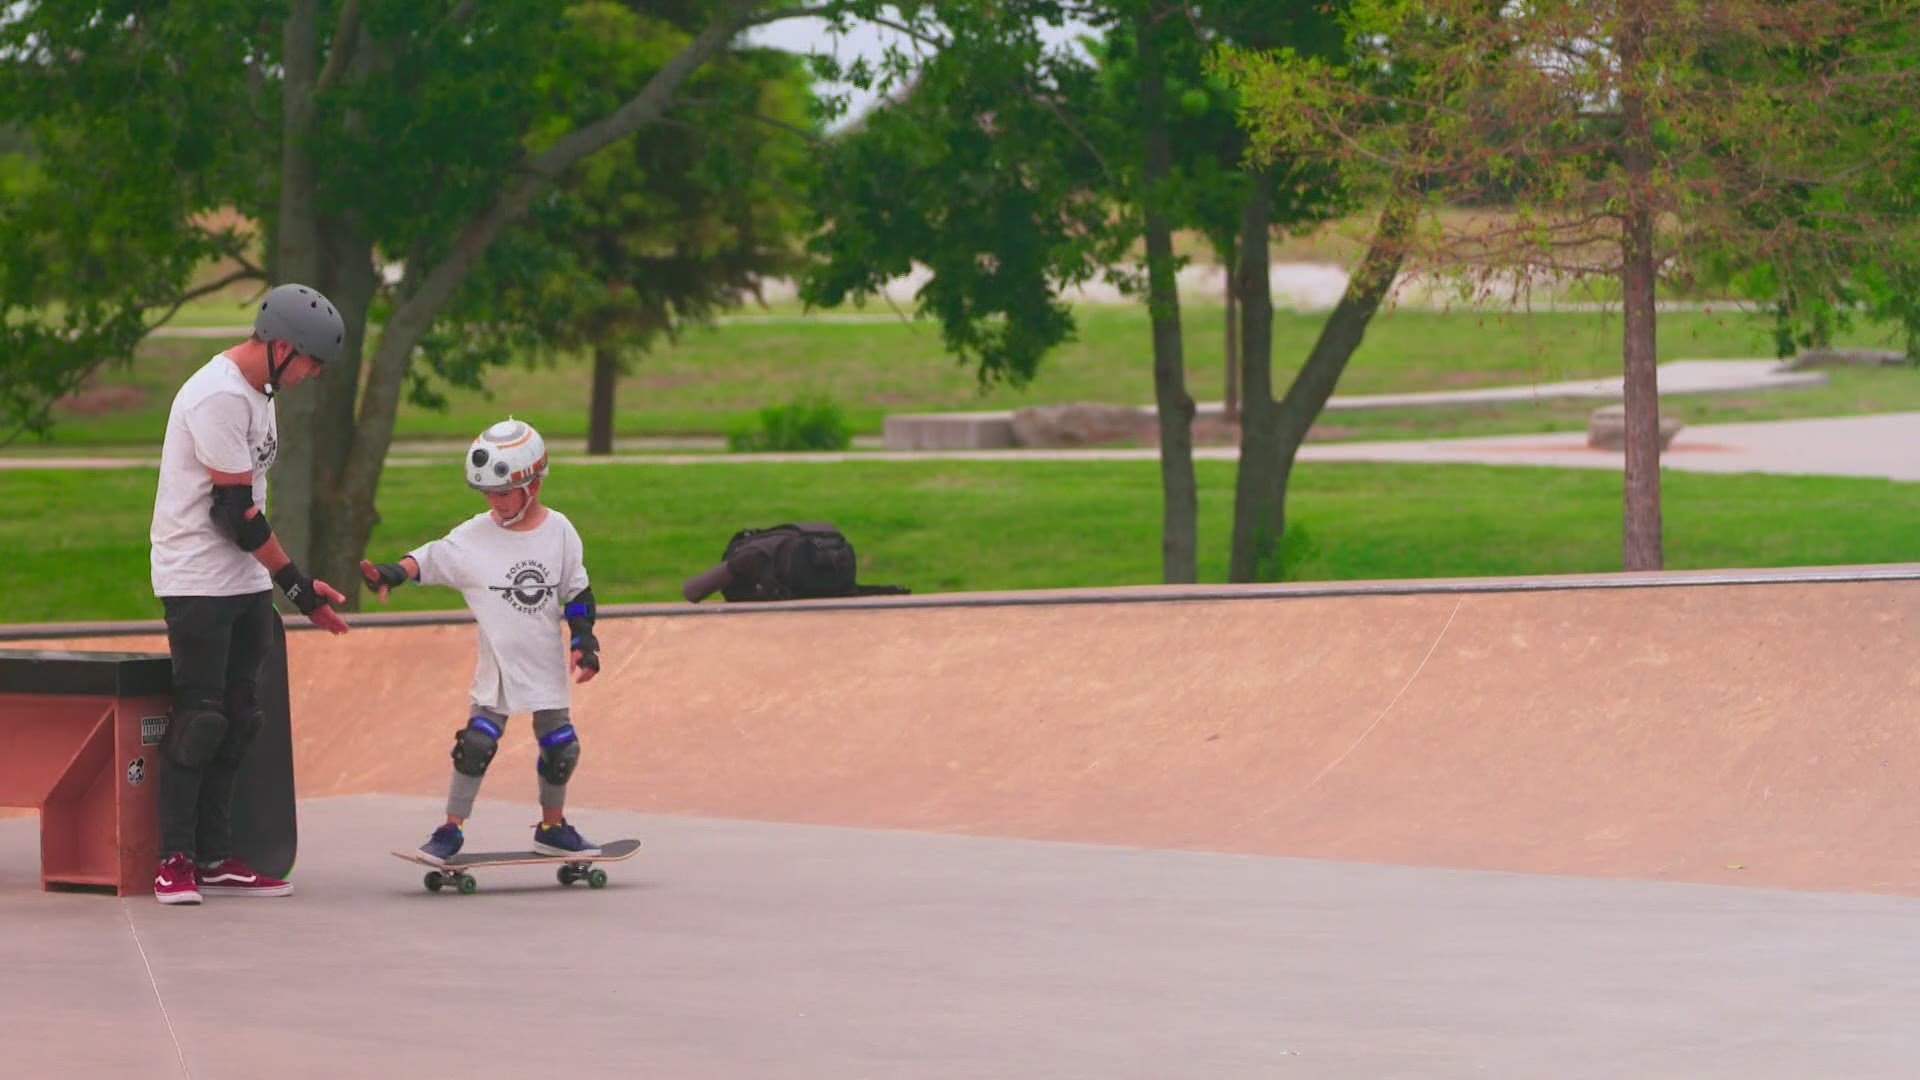 "Physically and mentally, it feels very freeing," Paul Field said about skateboarding.